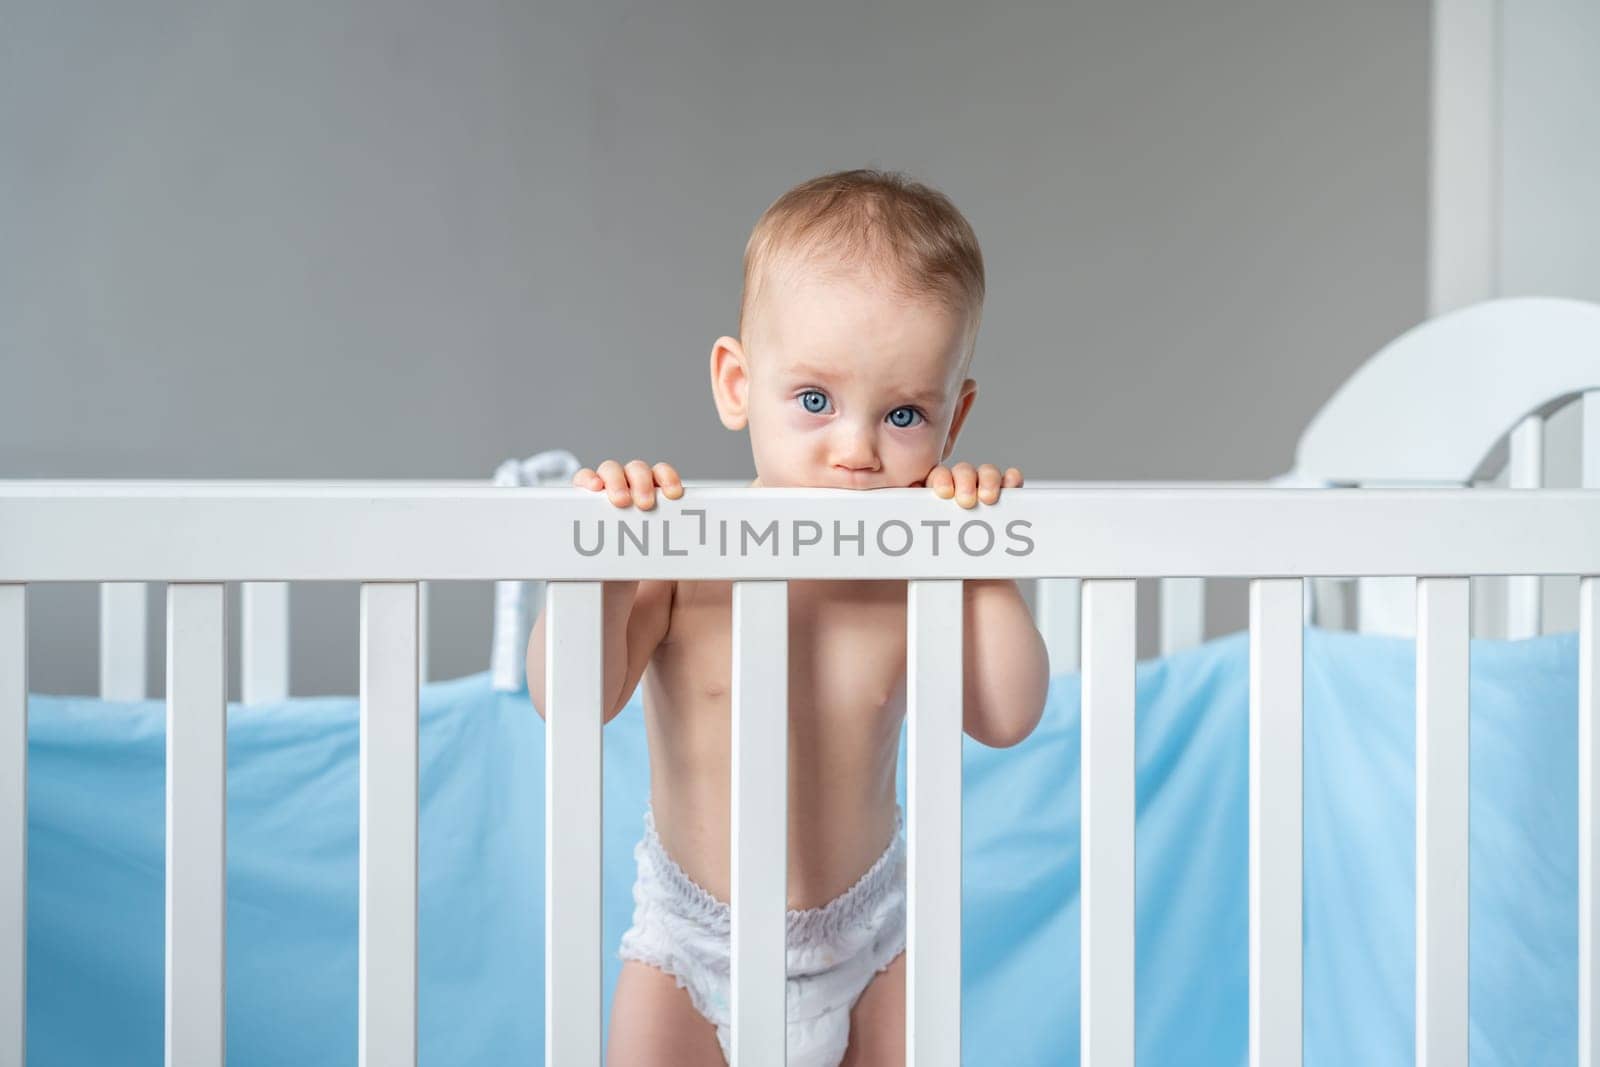 A baby in a diaper cutely bit the back of a wooden crib by sdf_qwe